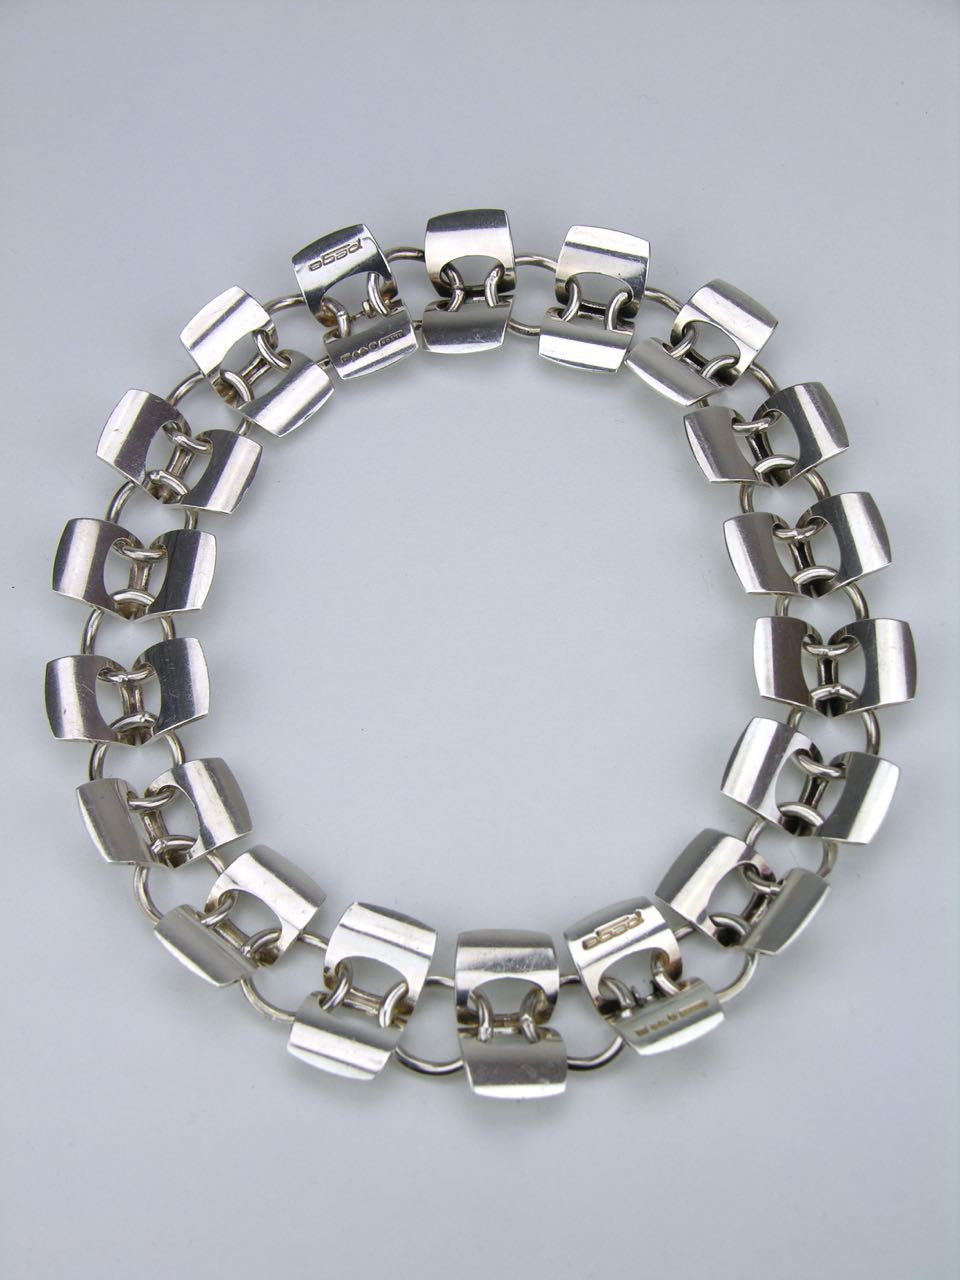 Alton pair of solid silver architectural bracelets that also form a necklace